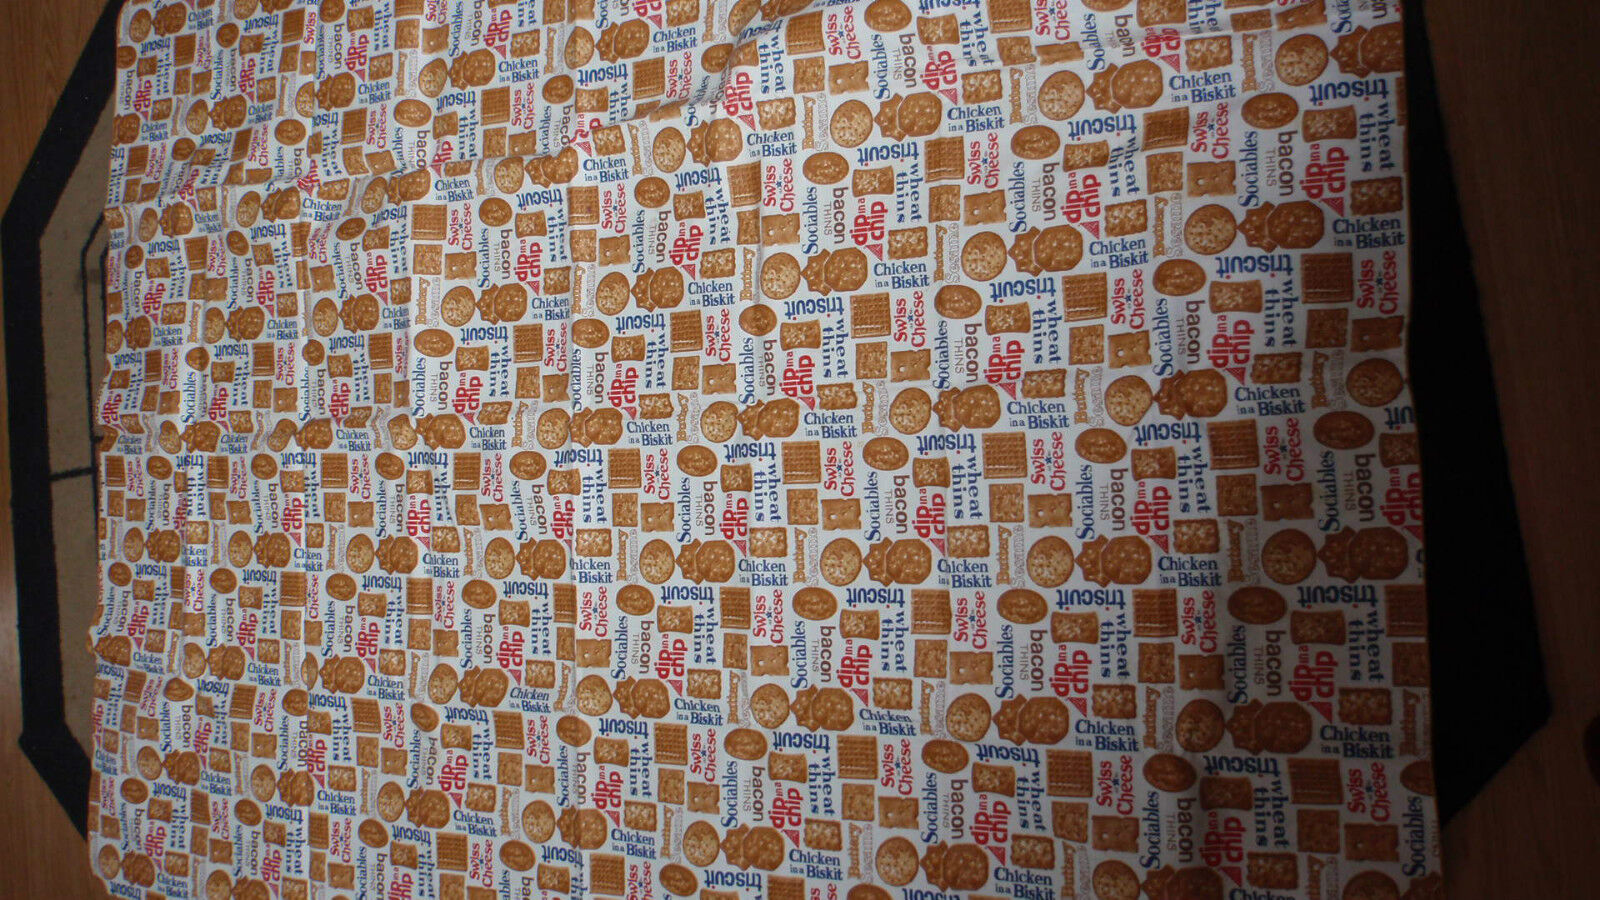 NABISCO CRACKERS ADVERTISING VINYL FLANNEL BACKED TABLECLOTH 52 X 70 